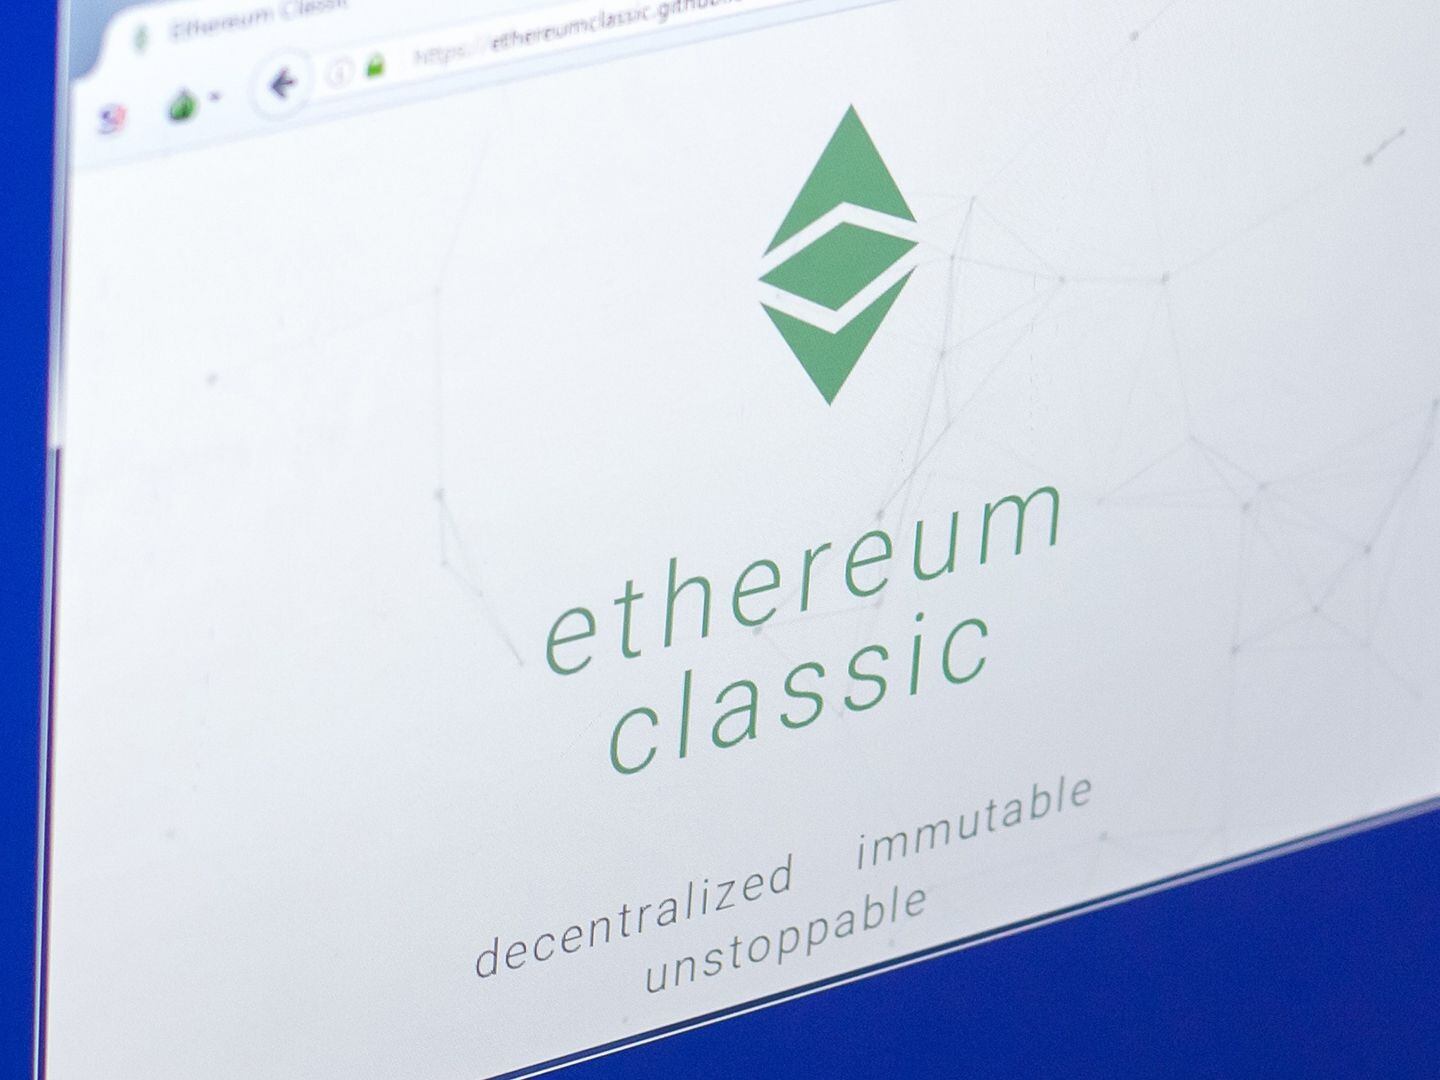 Ethereum classic coindesk search and earn bitcoin